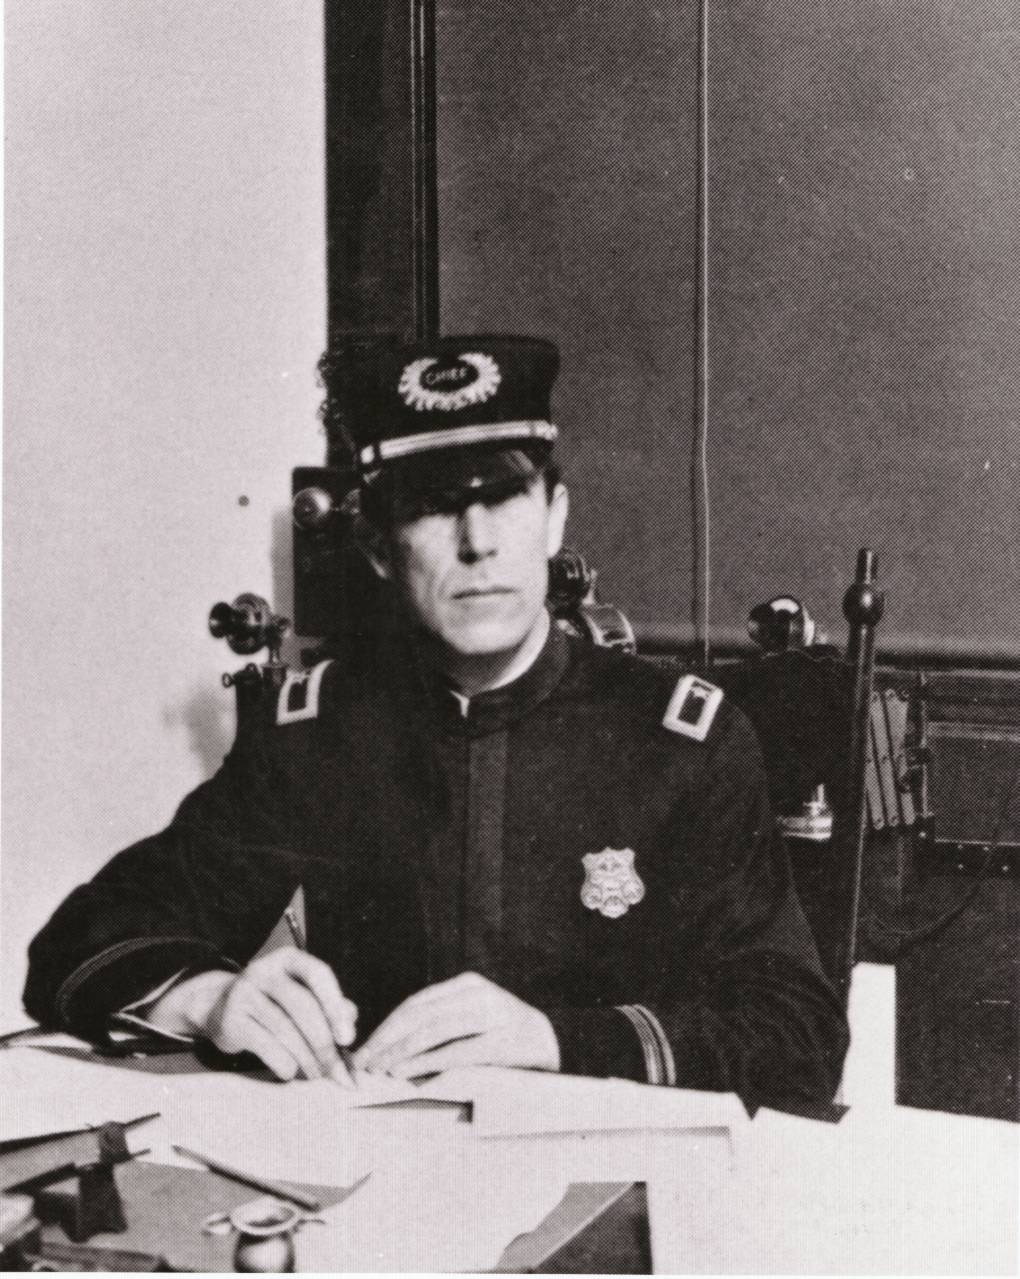 Portrait of August Vollmer sitting at his desk wearing a dark uniform and his chief's hat.